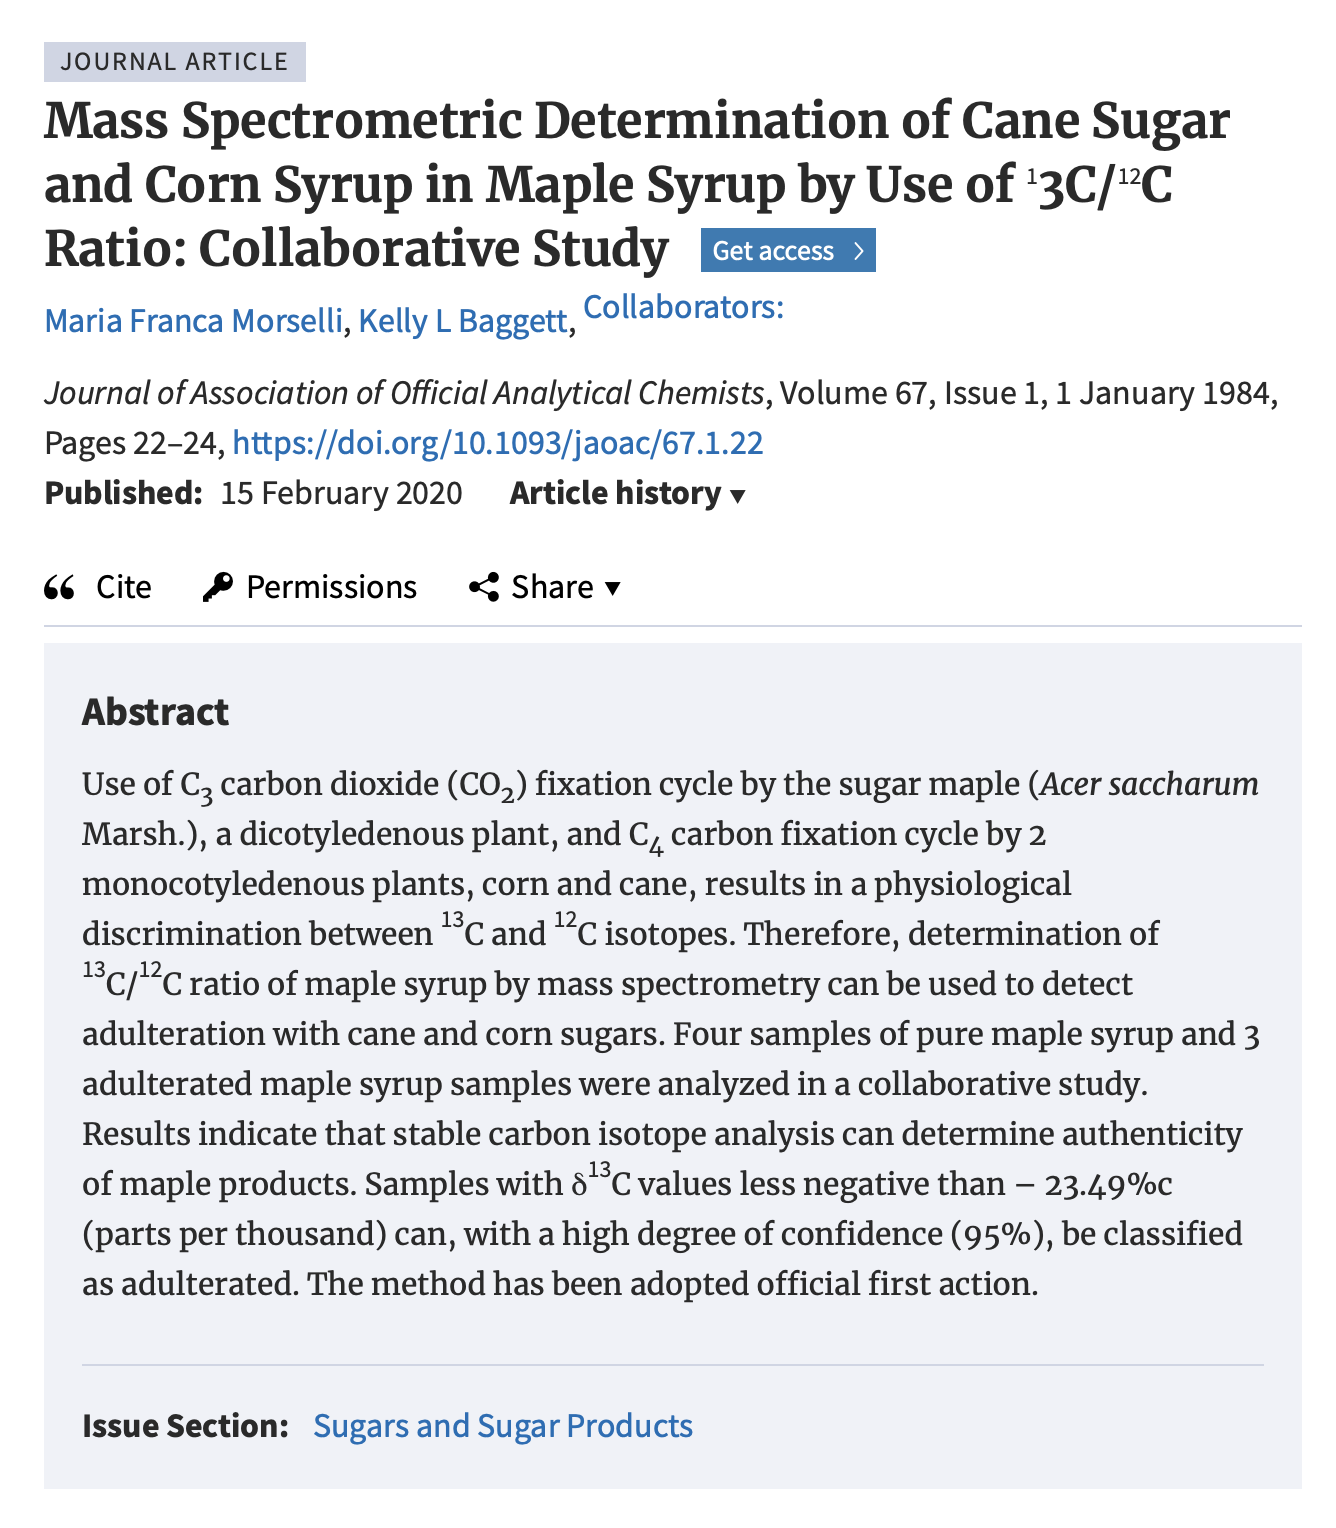 Mass Spectrometric Determination of Cane Sugar and Corn Syrup in Maple Syrup by Use of 13C/12C Ratio: Collaborative Study